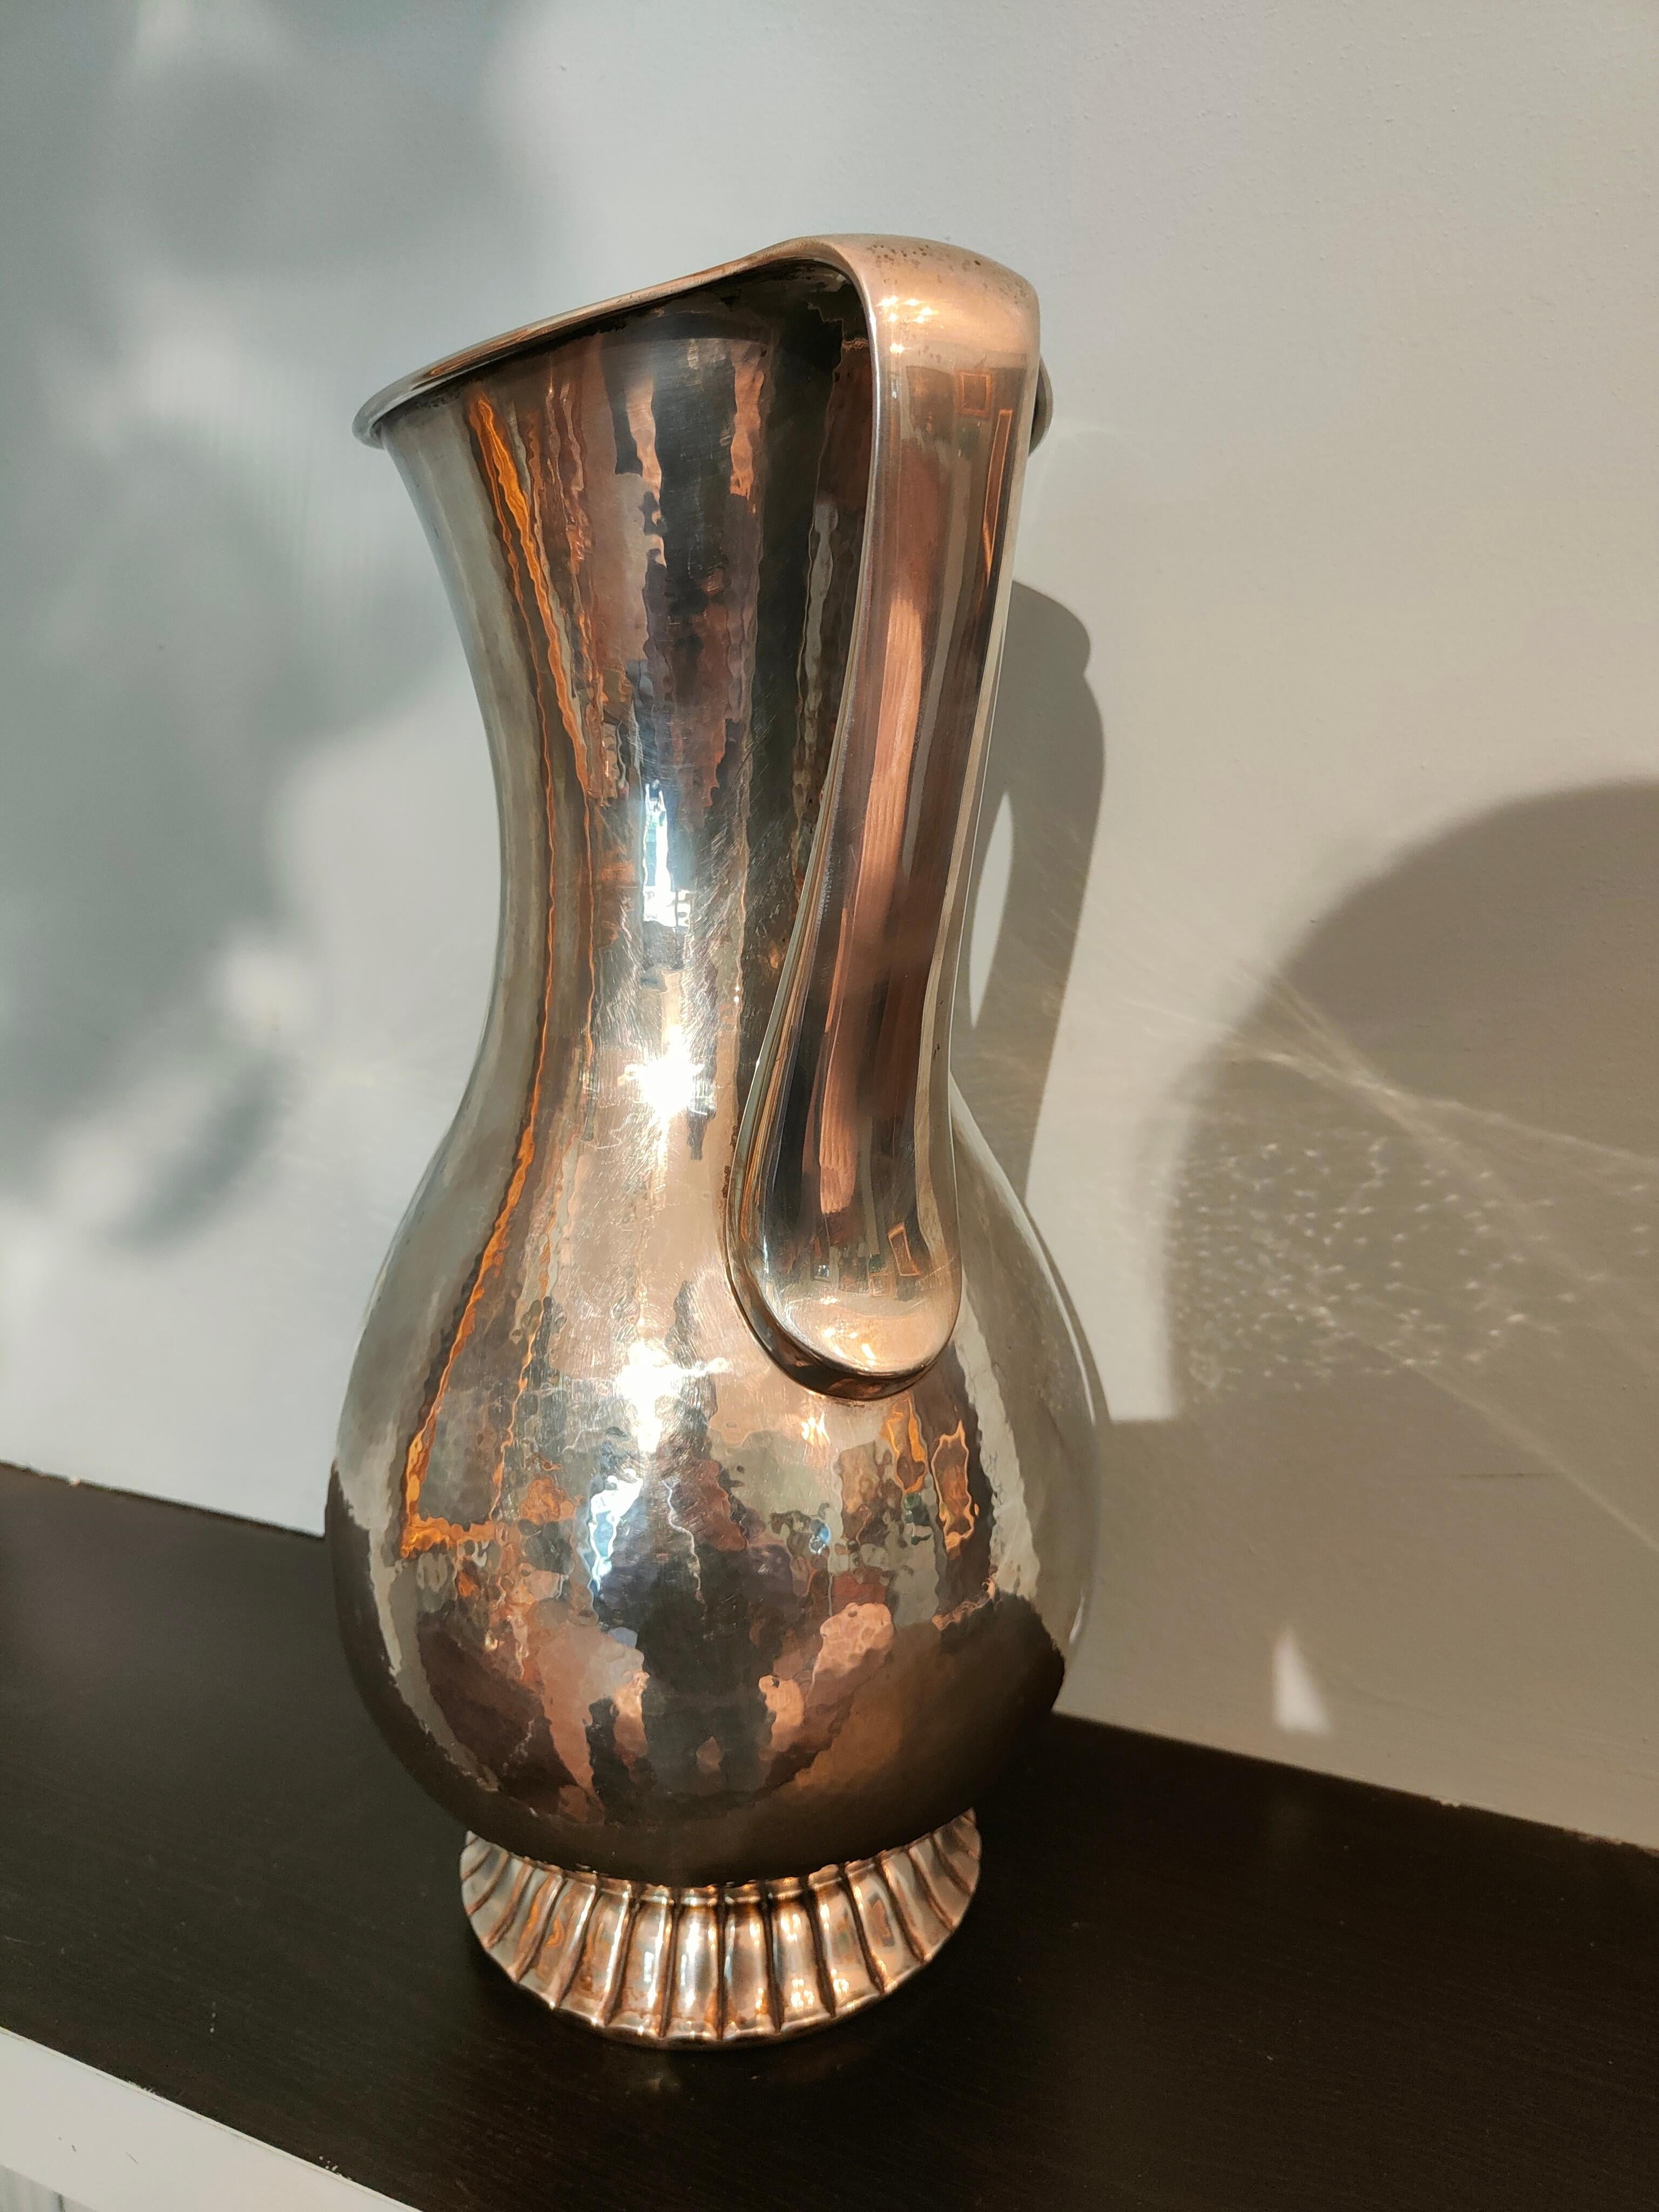 Large silver vase from the 30s.
Maker / Silversmith: Luigi Genazzi Milan.
Hallmark: 23 MI.
The shape of the vase makes it a unique piece of 1930s design. 
Weight: 2395 gr.
Size: 44 X 25.5cm.
The value of some silver works, sometimes